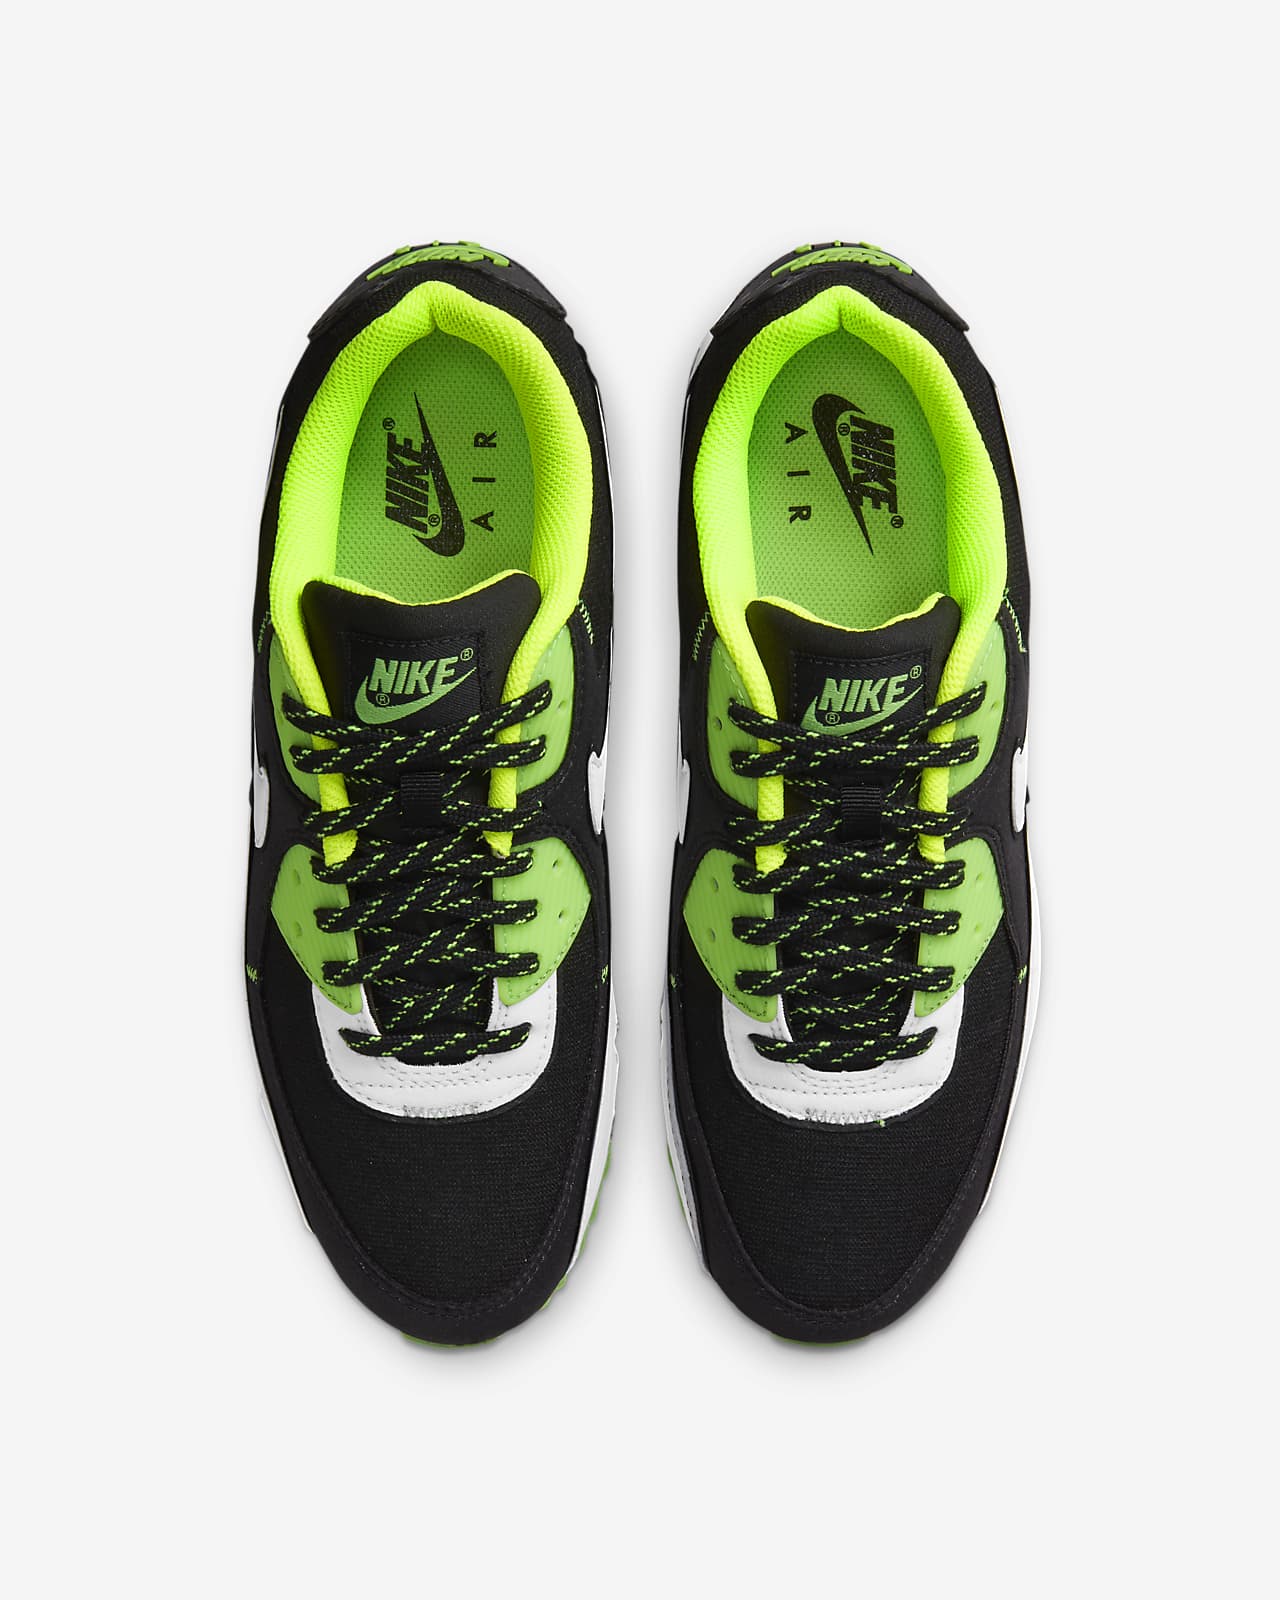 Nike Air Max 90 Exeter Edition Men's Shoes